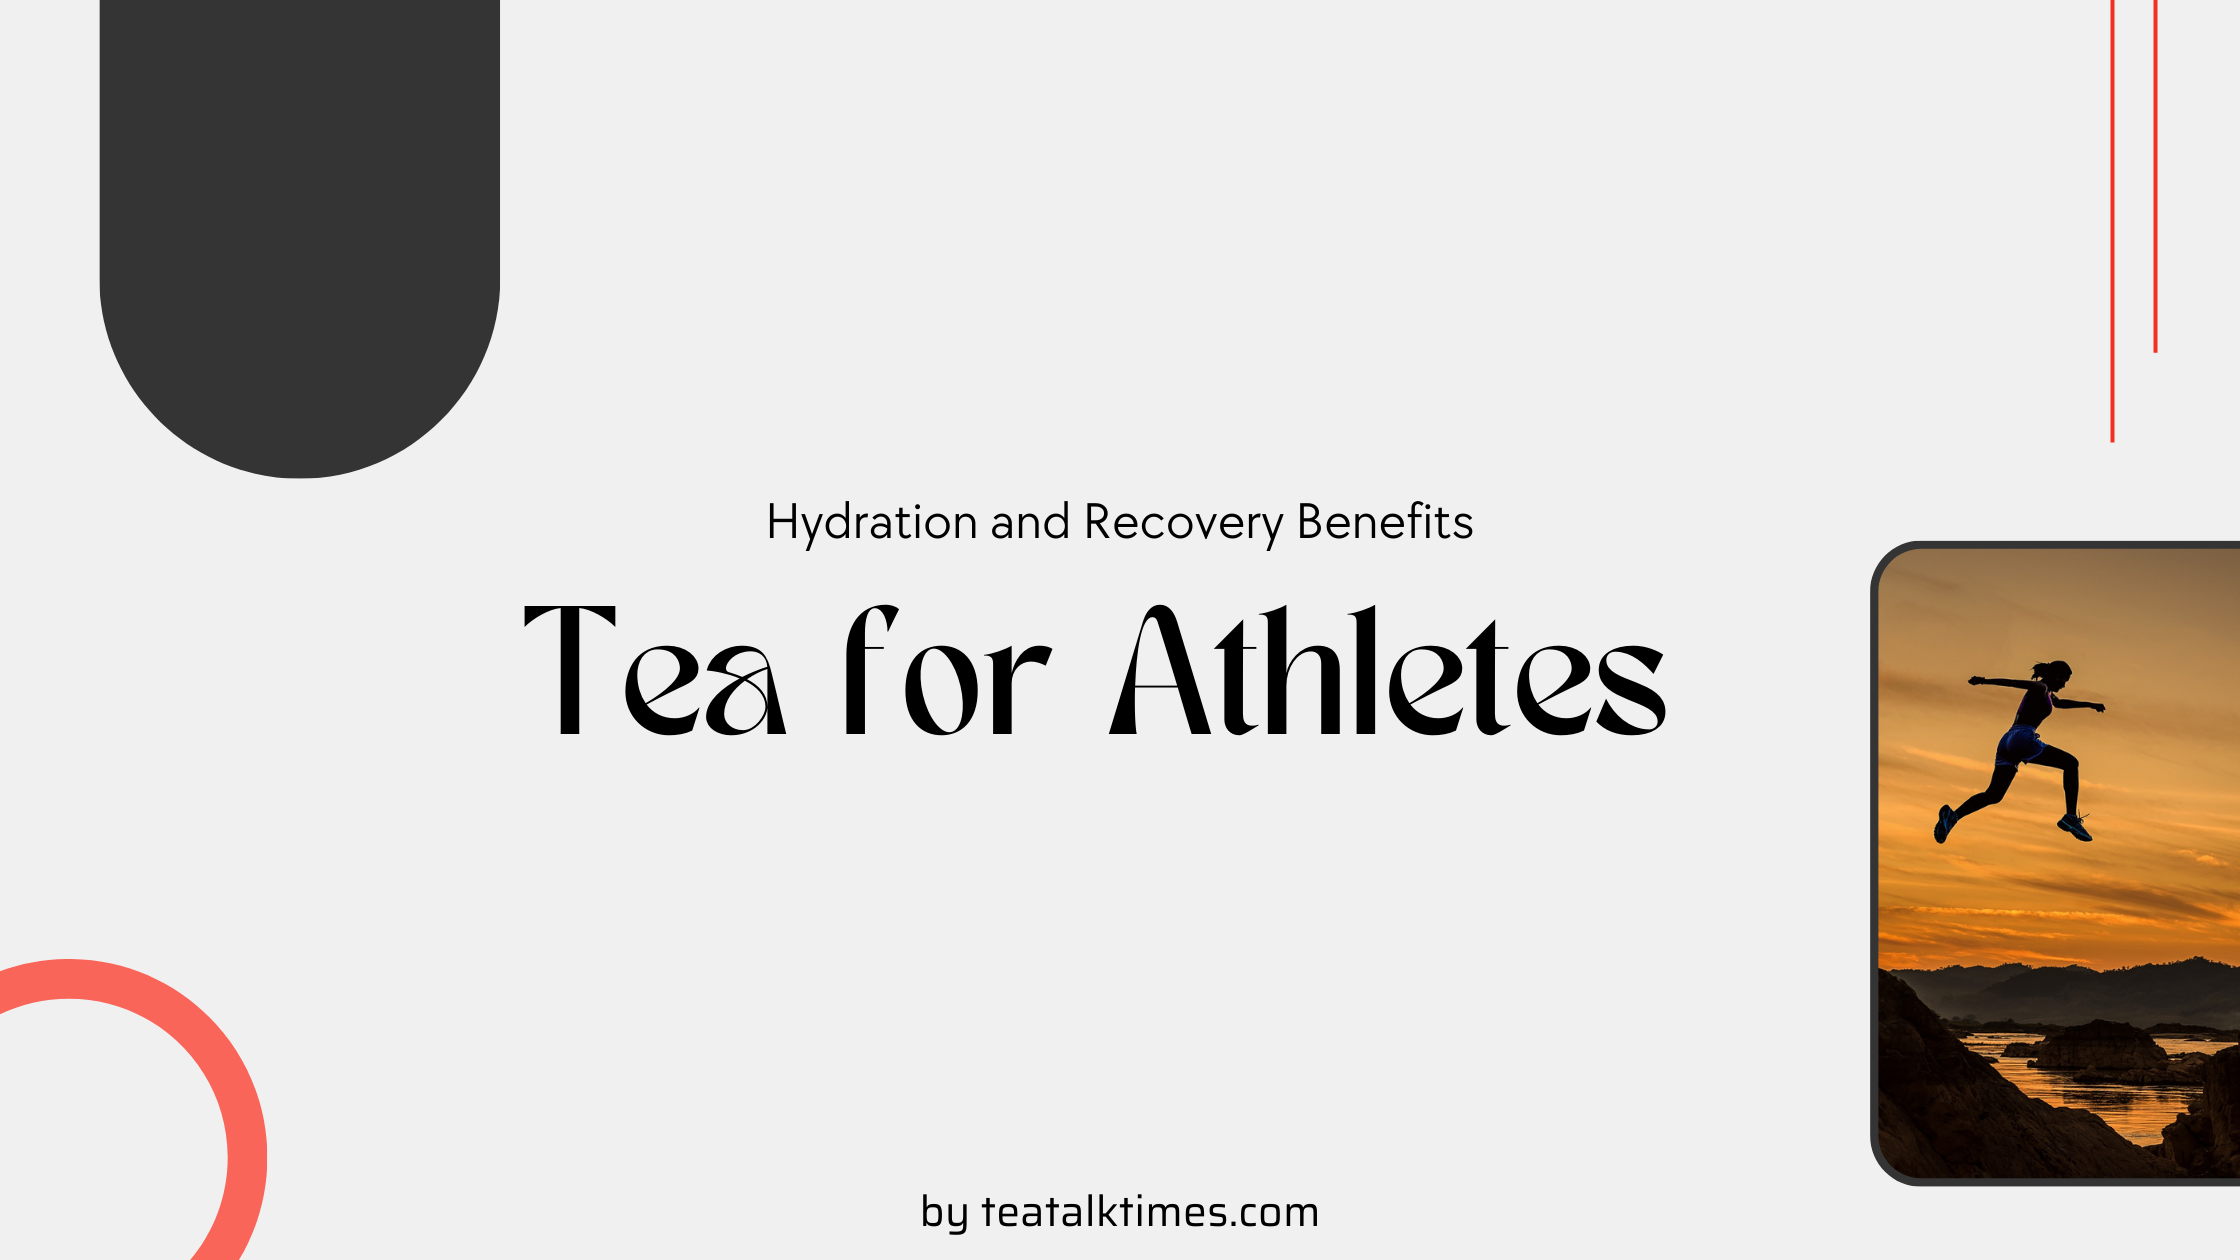 Tea for Athletes: Hydration and Recovery Benefits